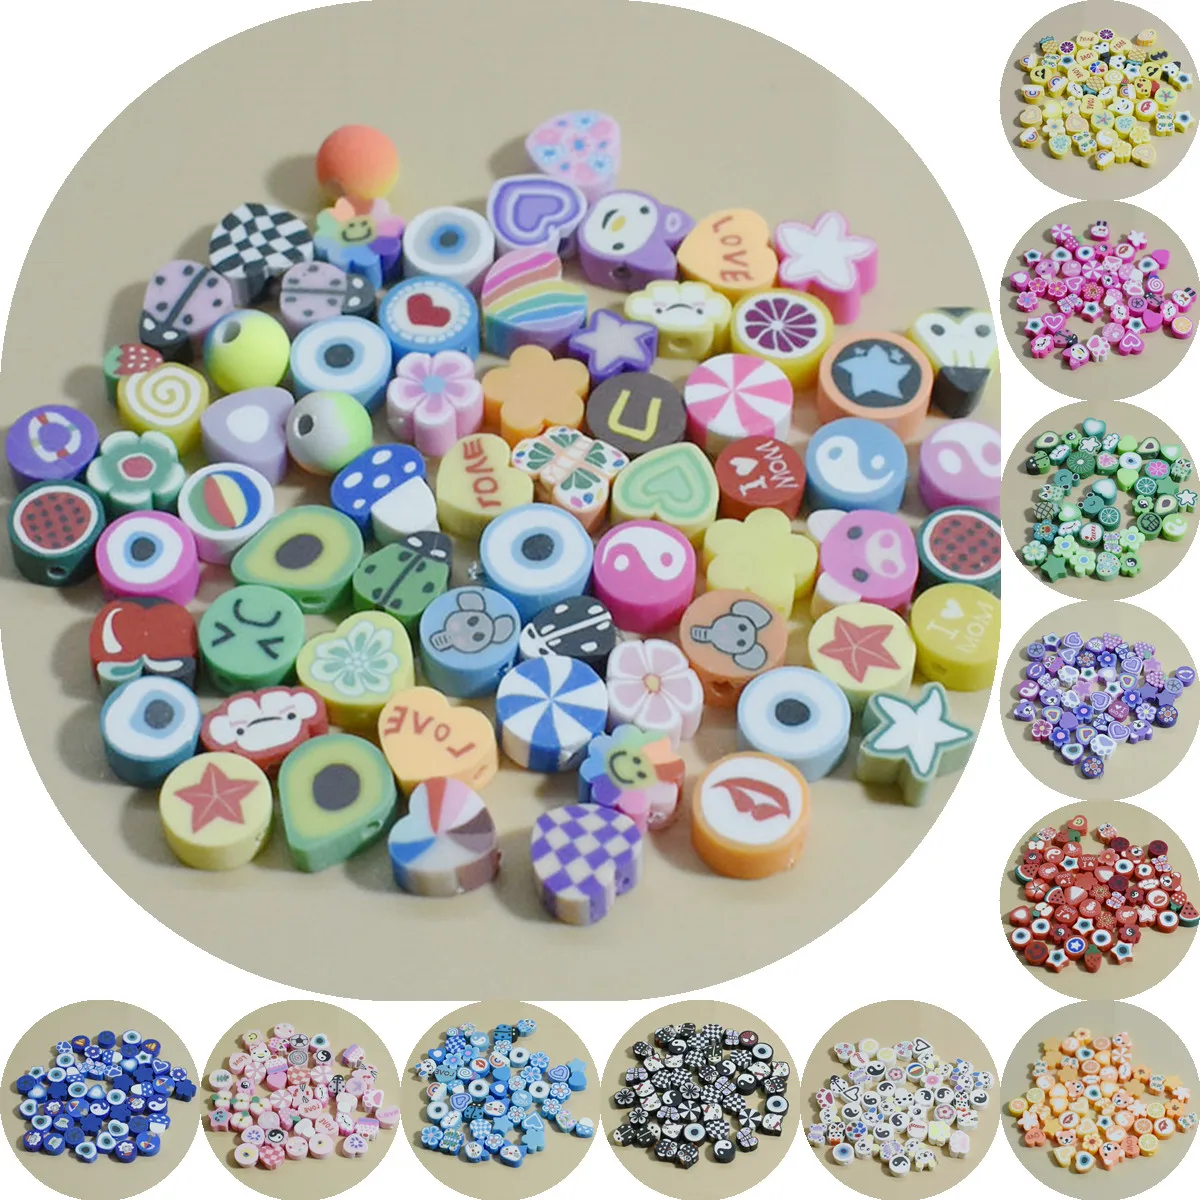 

DIY10mm 20/50/100/200pcs Yellow Smiley Face Beads Polymer Clay Beads Loose Spacer Beads For Jewelry Making Bracelet Accessories